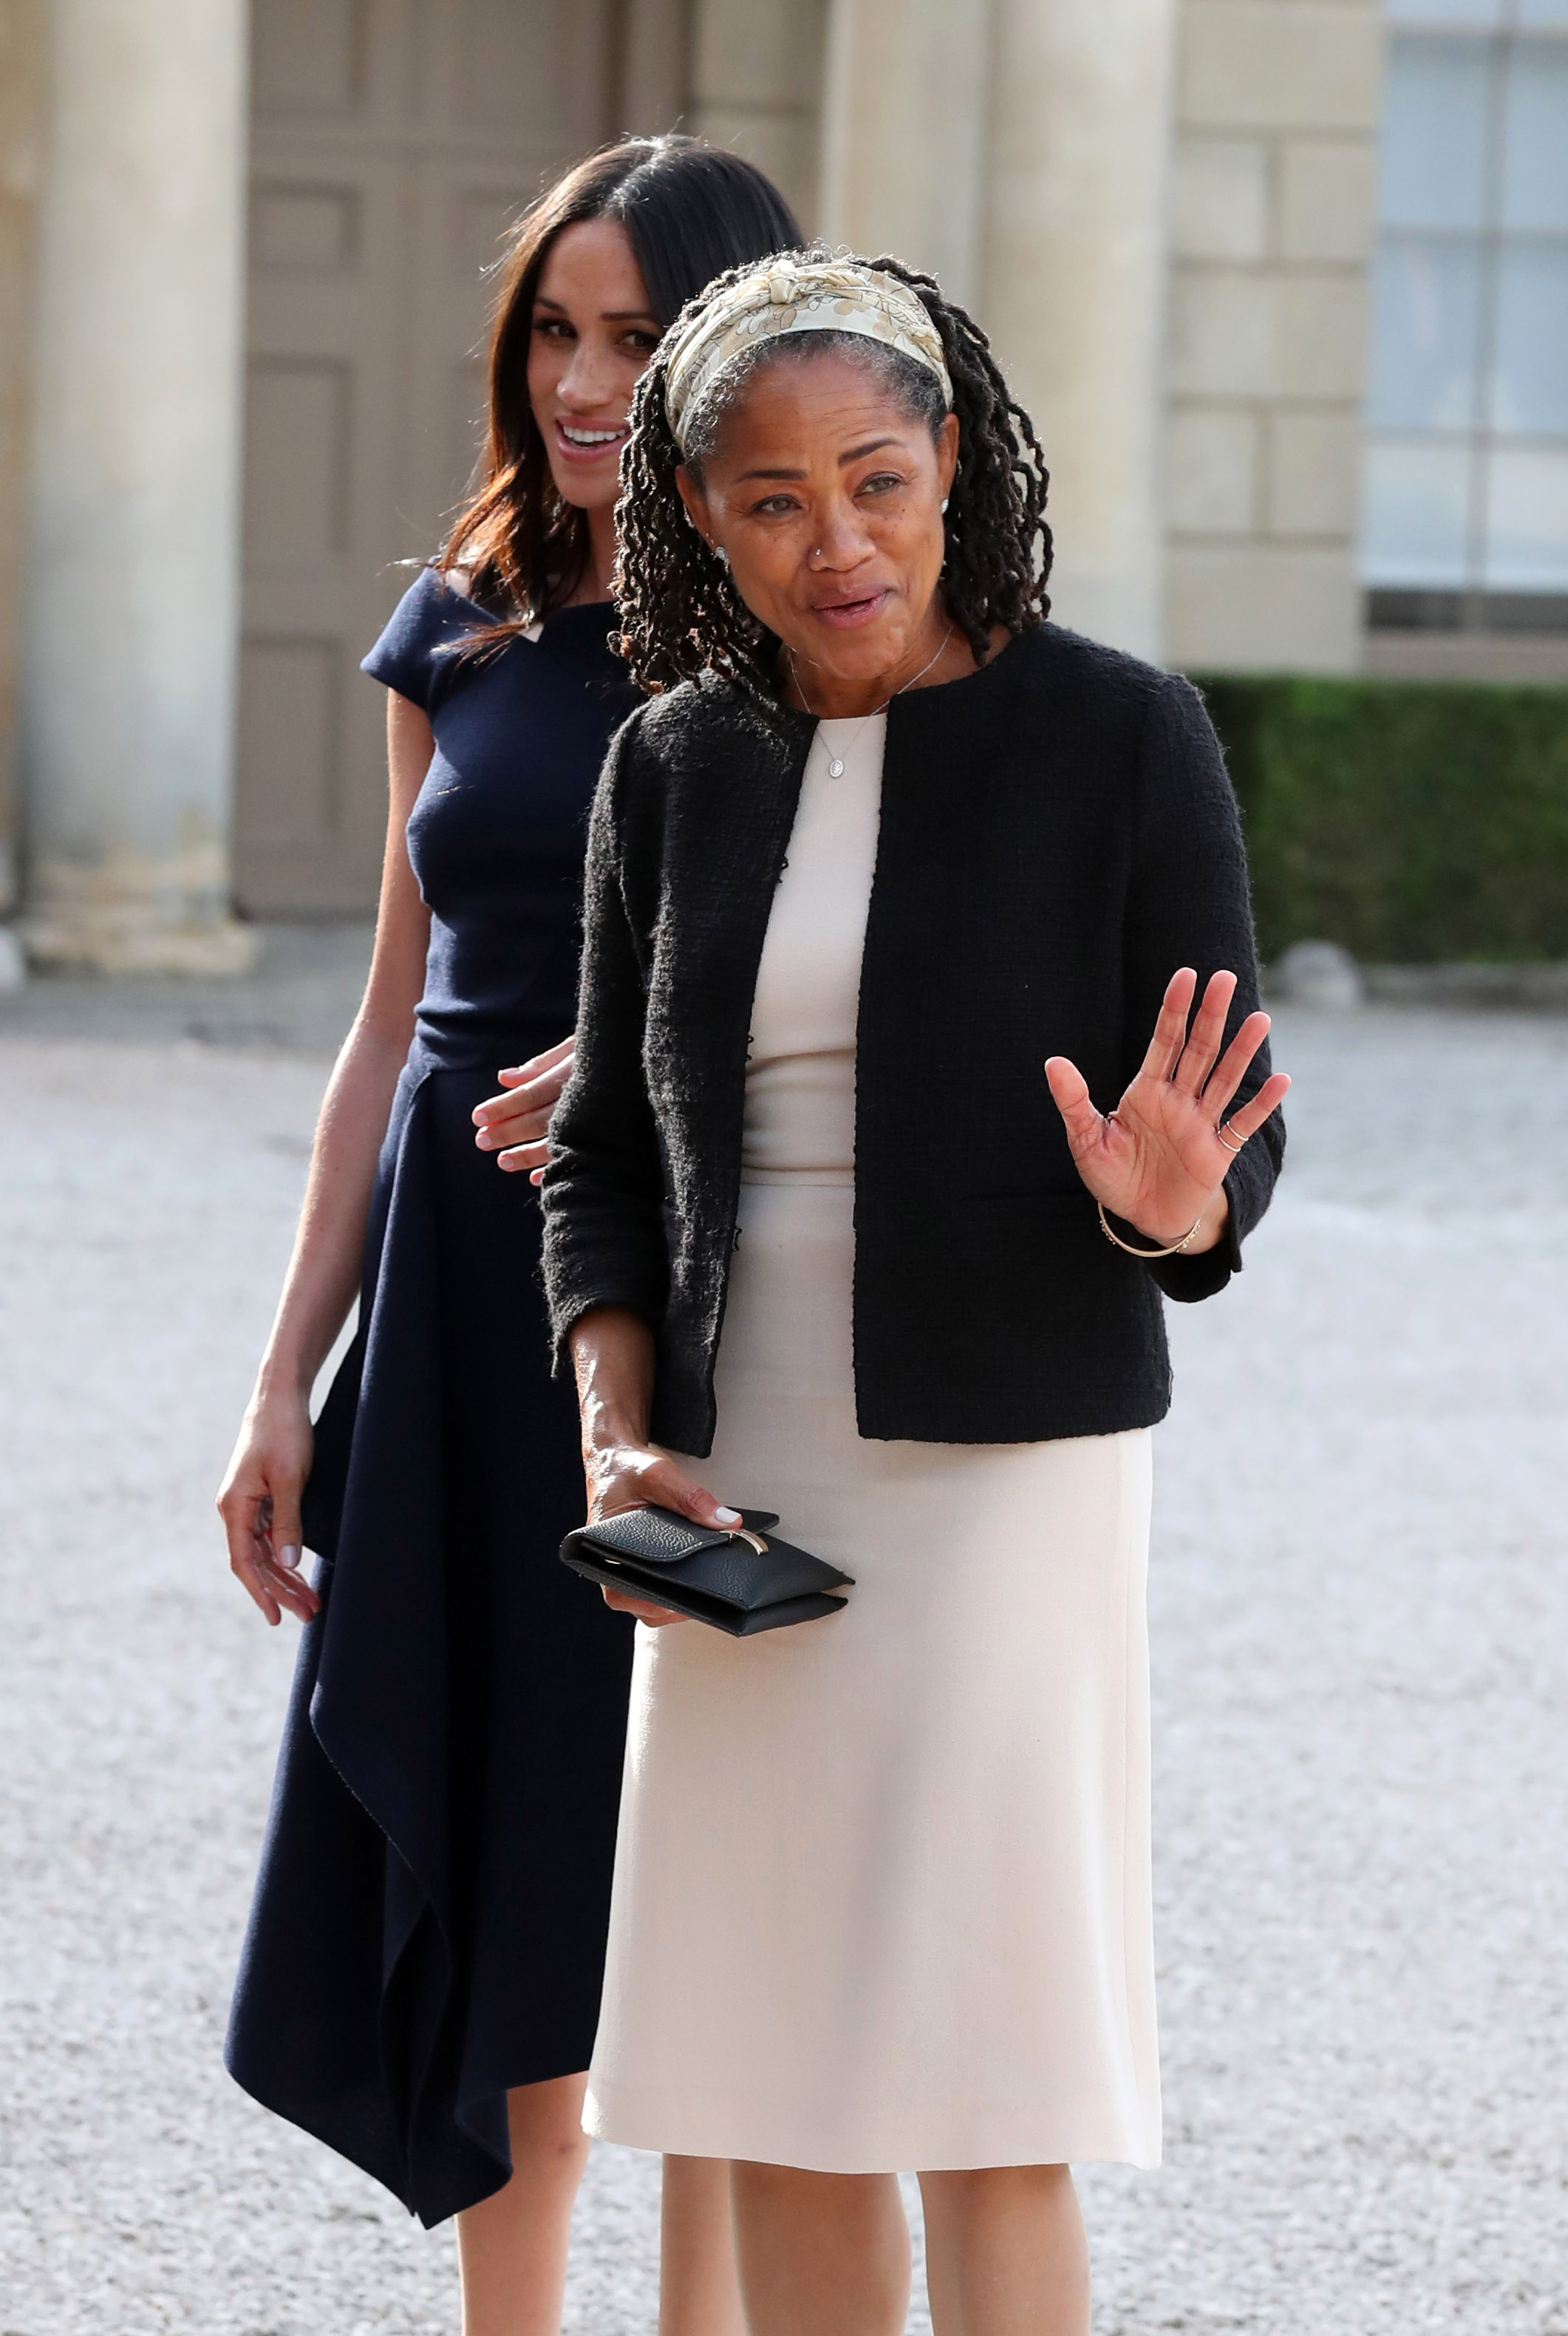 Meghan Markle and Doria Ragland during the Cliveden House Hotel on the National Trust's Cliveden Estate on May 18, 2018 | Getty Images